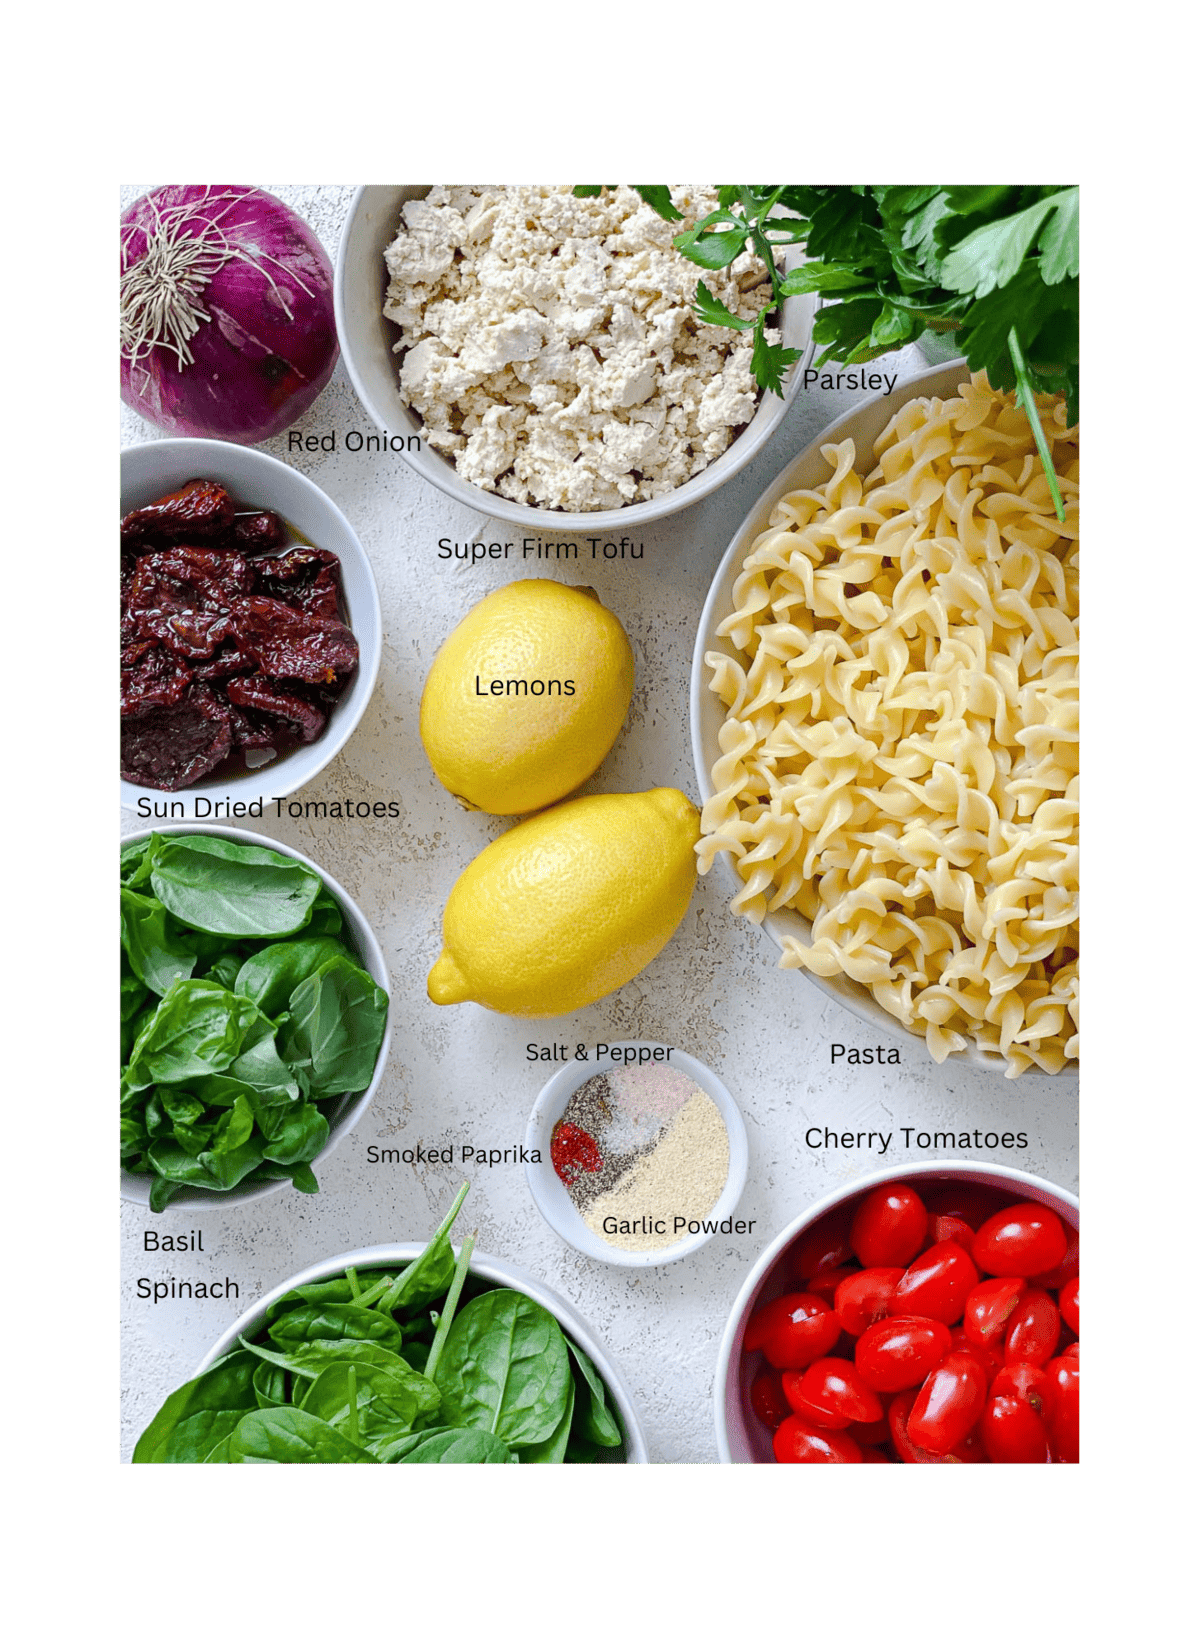 ingredients for sun dried tomato pasta salad measured out a،nst a white surface